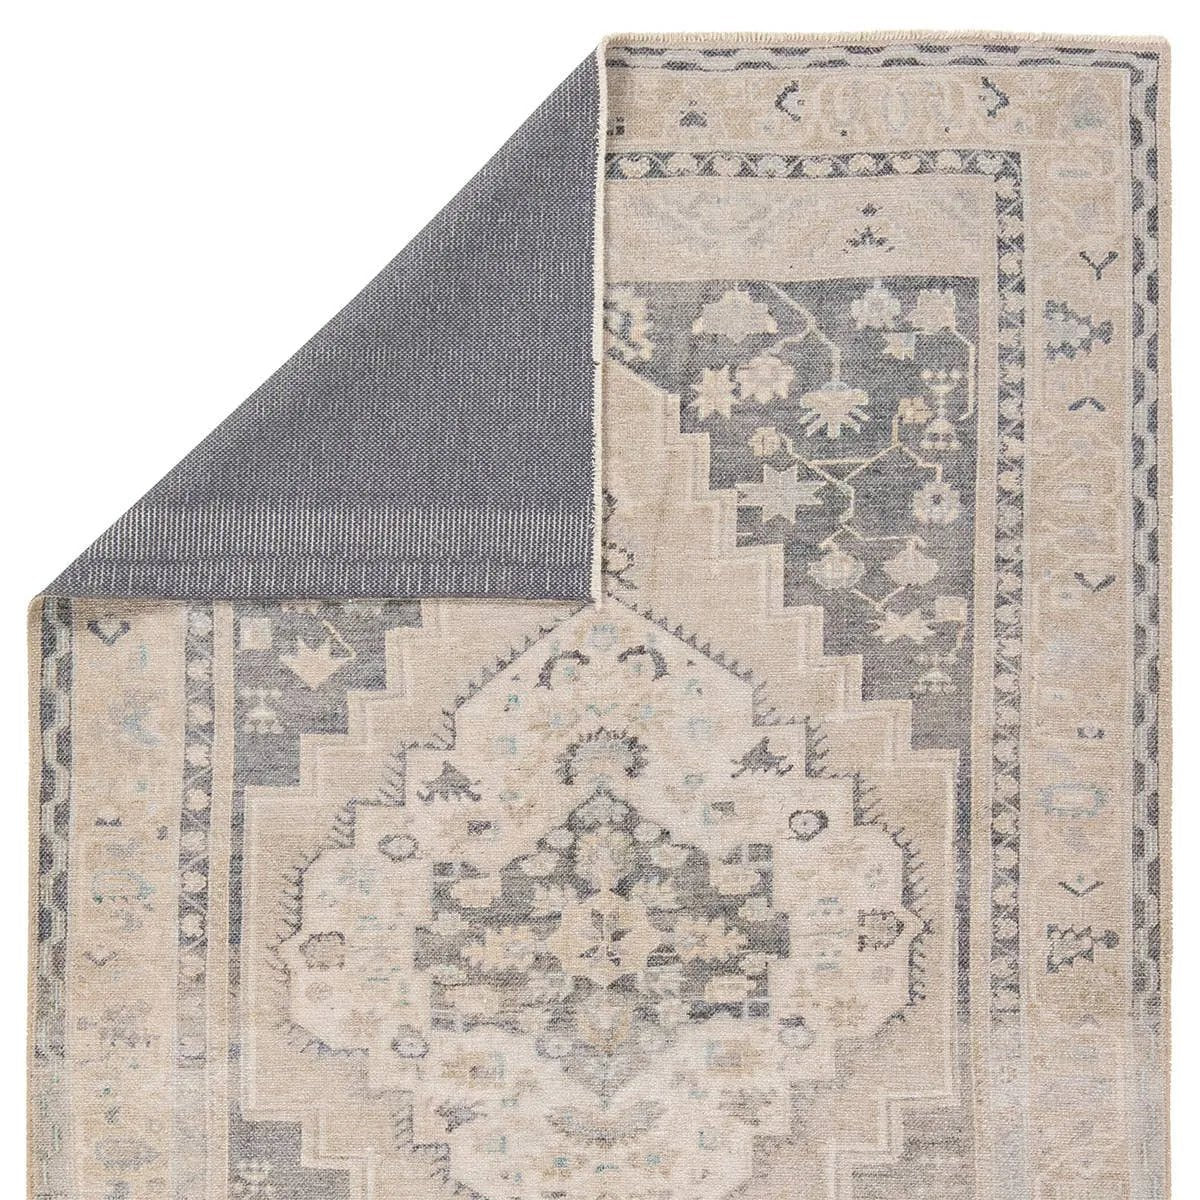 Distressed, vintage designs offer an elevated tone for the Lumal Collection. The Pasin rug features an updated traditional inspired medallion and multiple floral borders in tones of navy, light green, cream, gray, and tan. This machine washable rug is stain resistant and easy to clean, perfect for homes with children and pets. Amethyst Home provides interior design, new home construction design consulting, vintage area rugs, and lighting in the Scottsdale metro area.